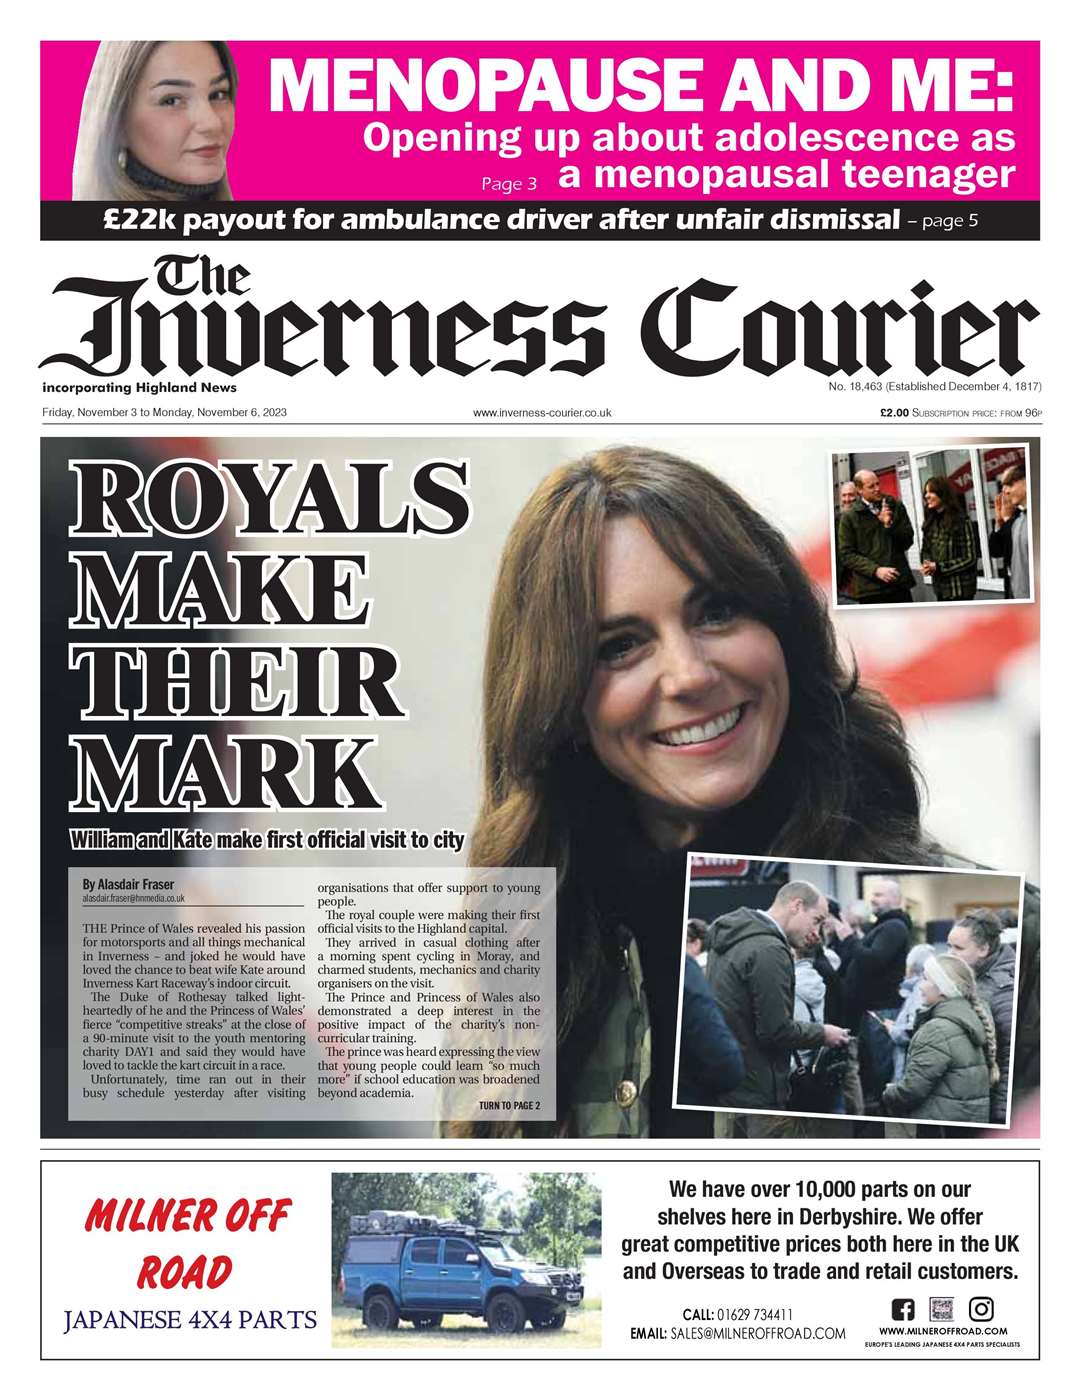 The Inverness Courier, November 3, front page.